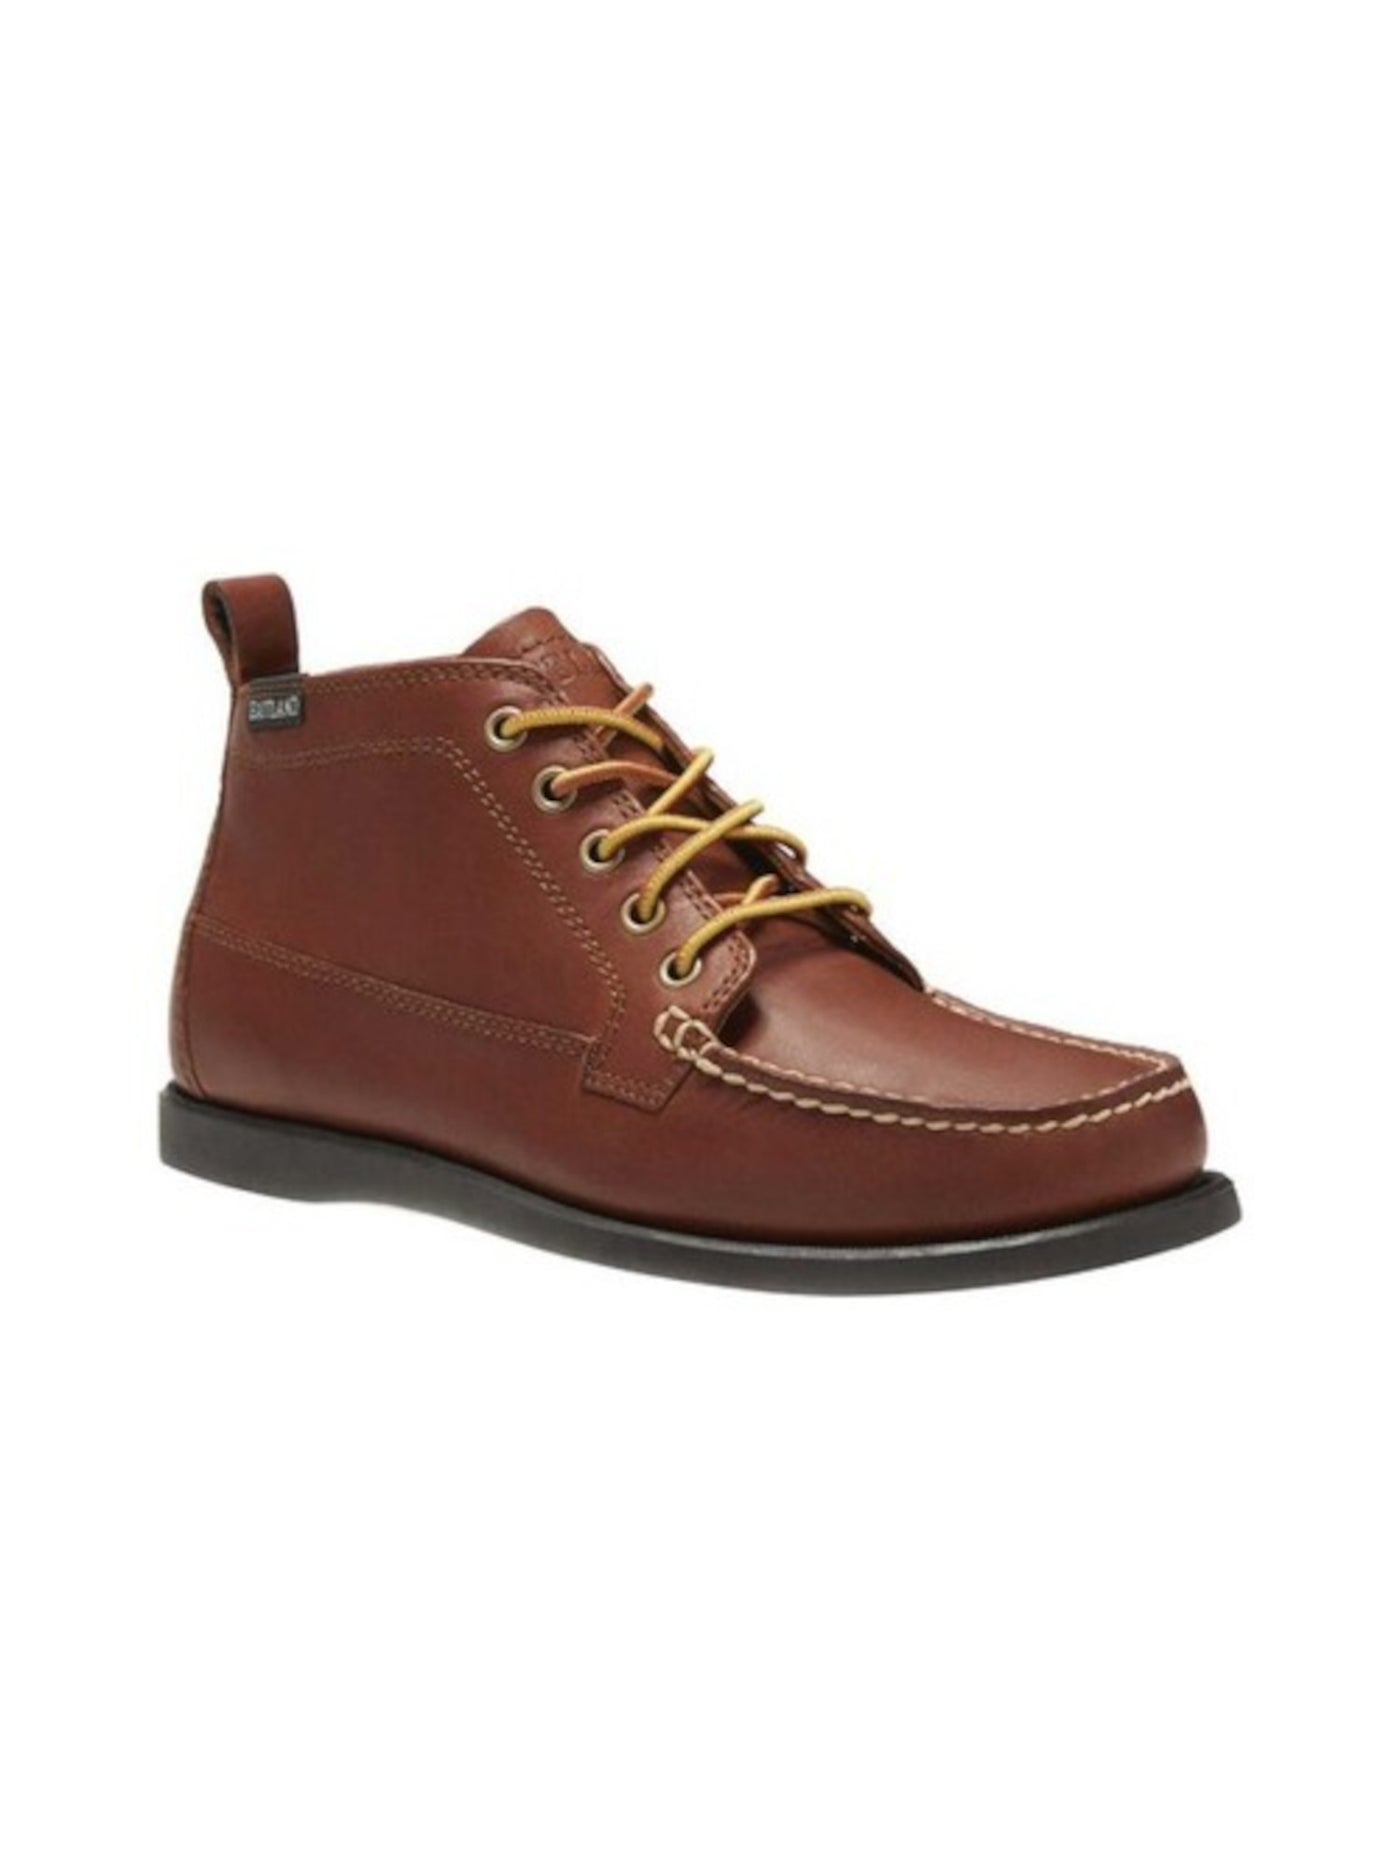 EASTLAND Mens Brown Shock Absorbing Seneca Round Toe Lace-Up Leather Chukka Boots 9.5 D